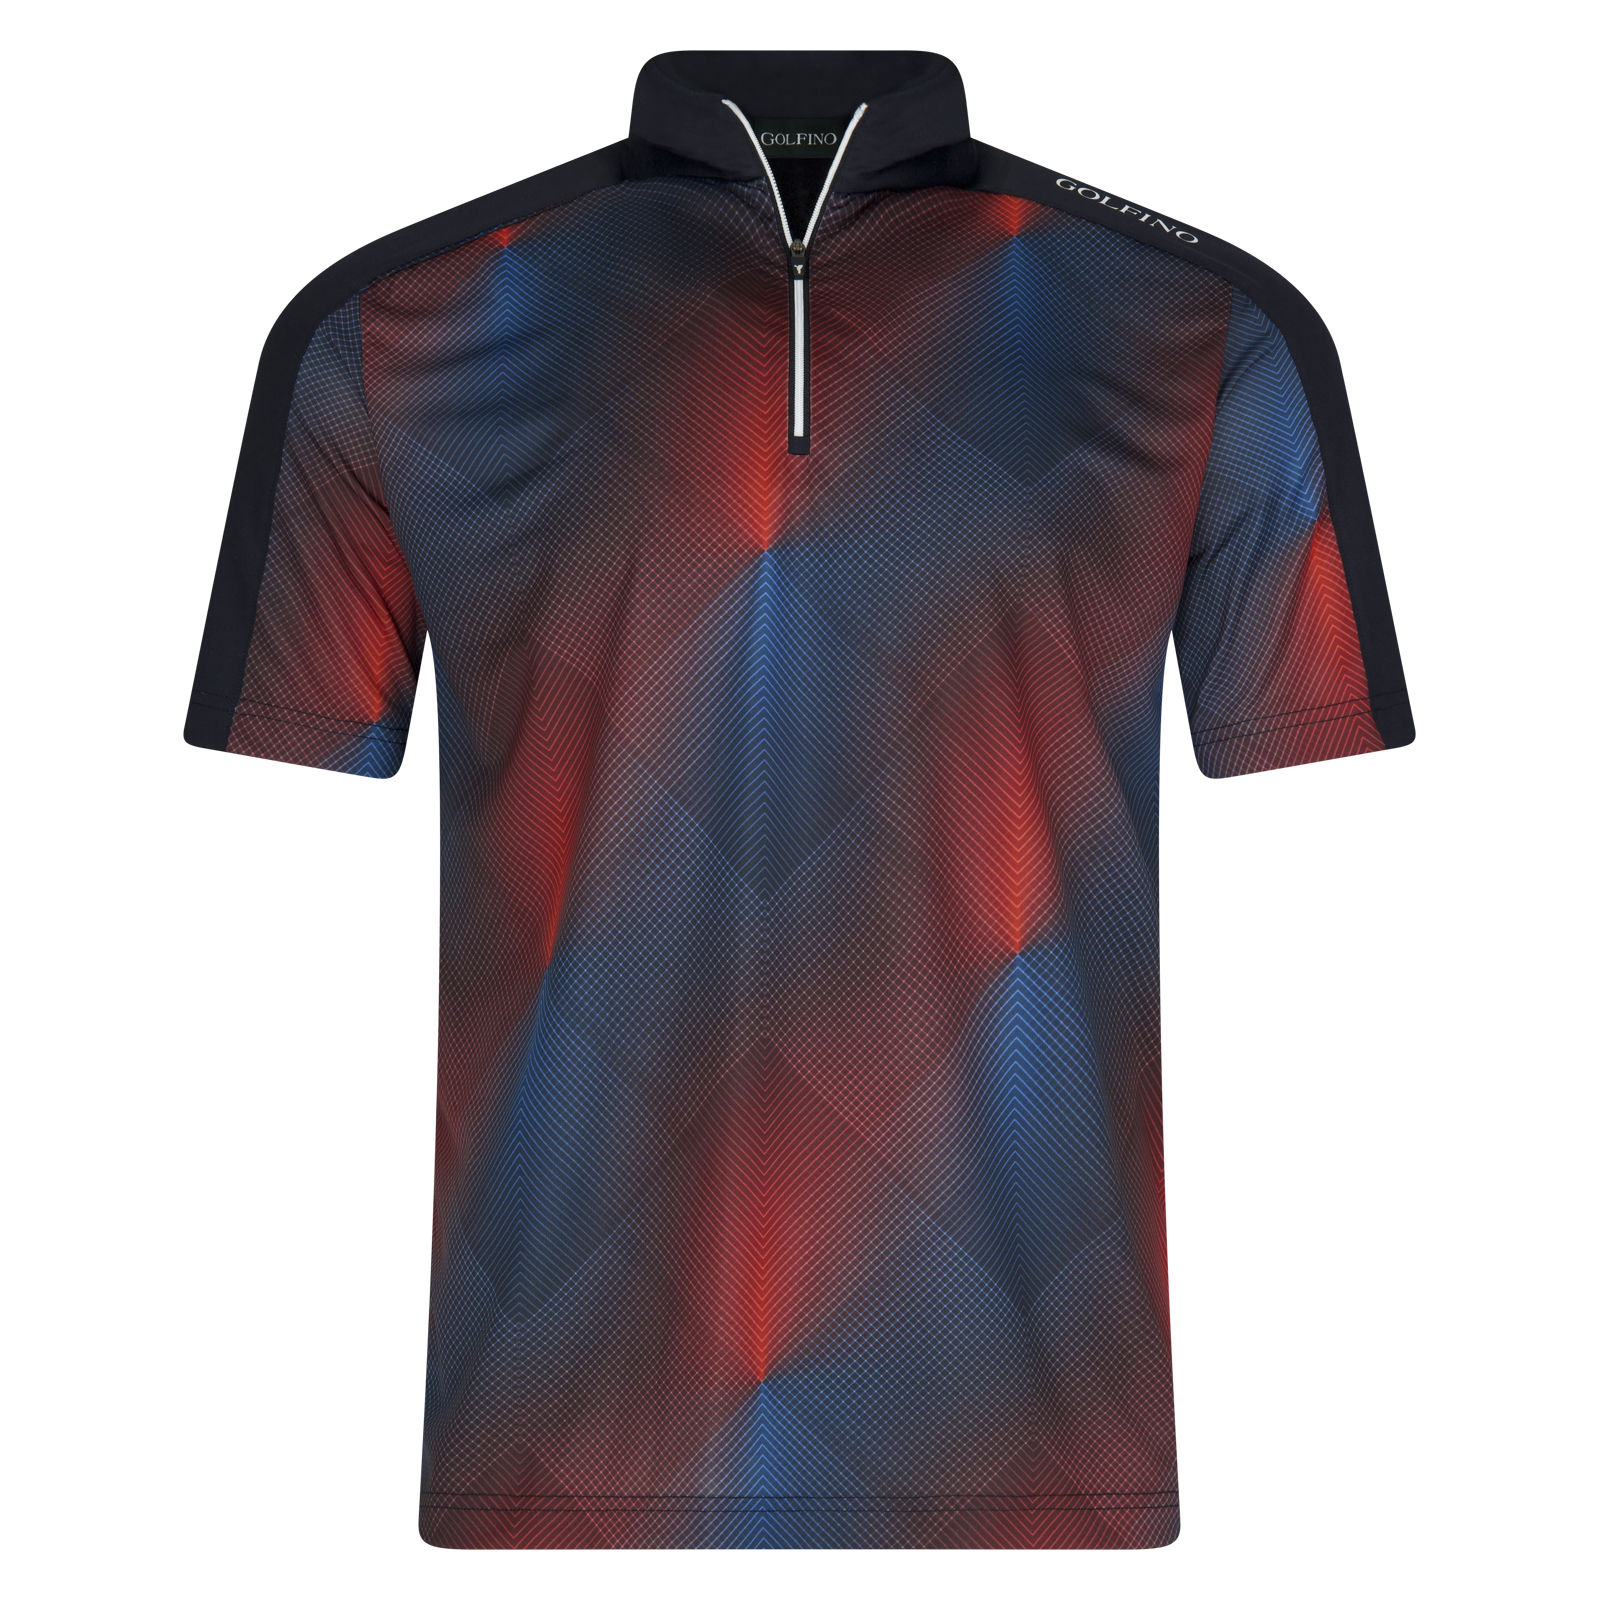 Men's short-sleeved performance shirt with stretch function